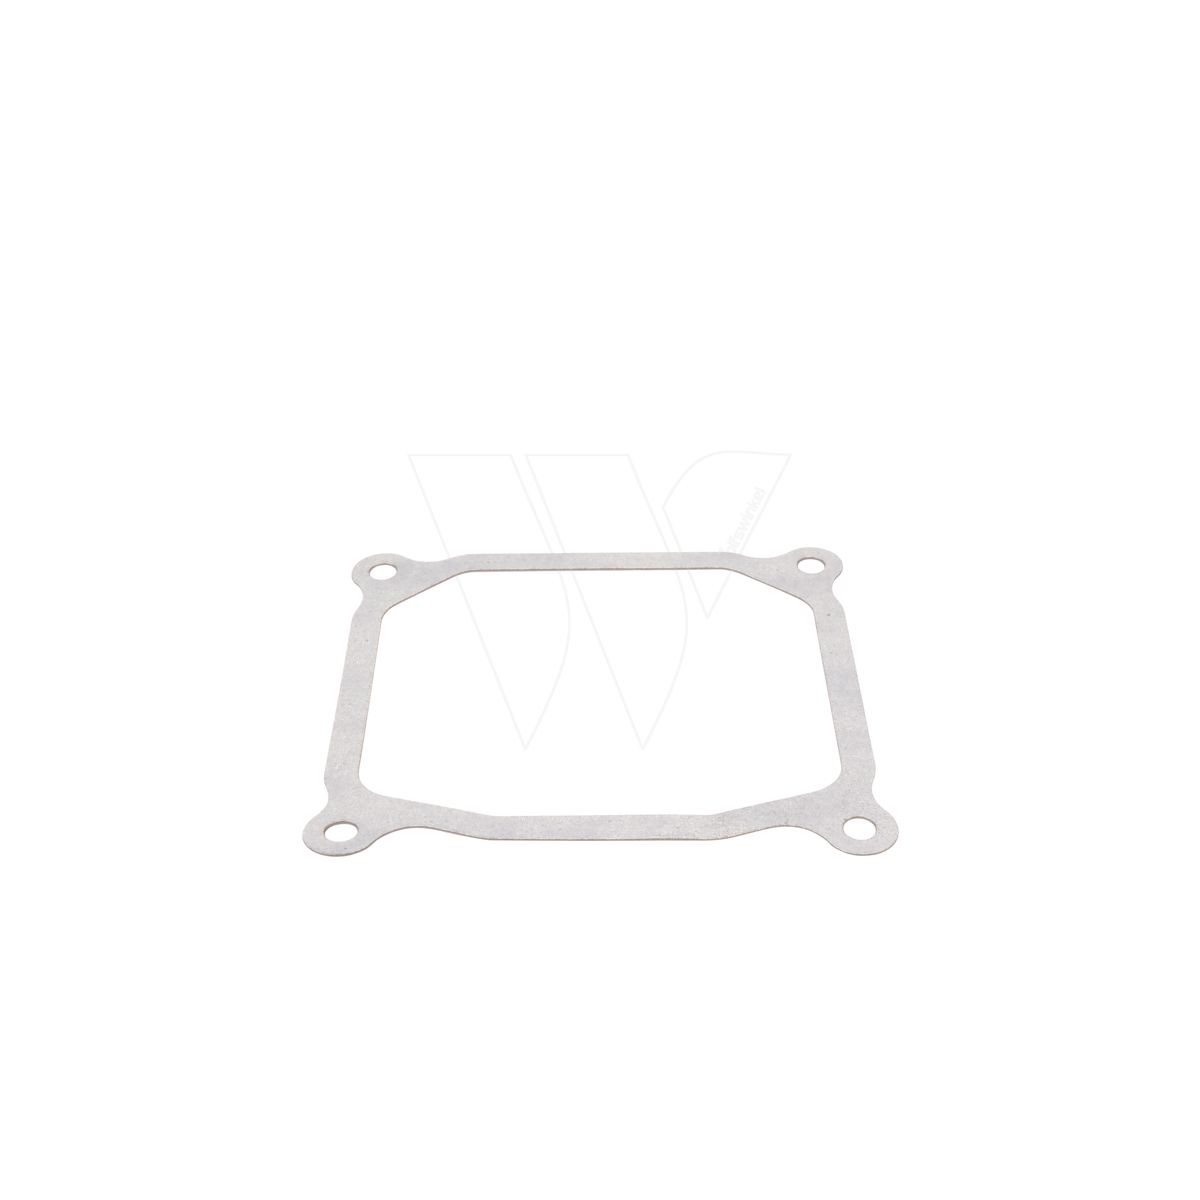 Gasket, cover